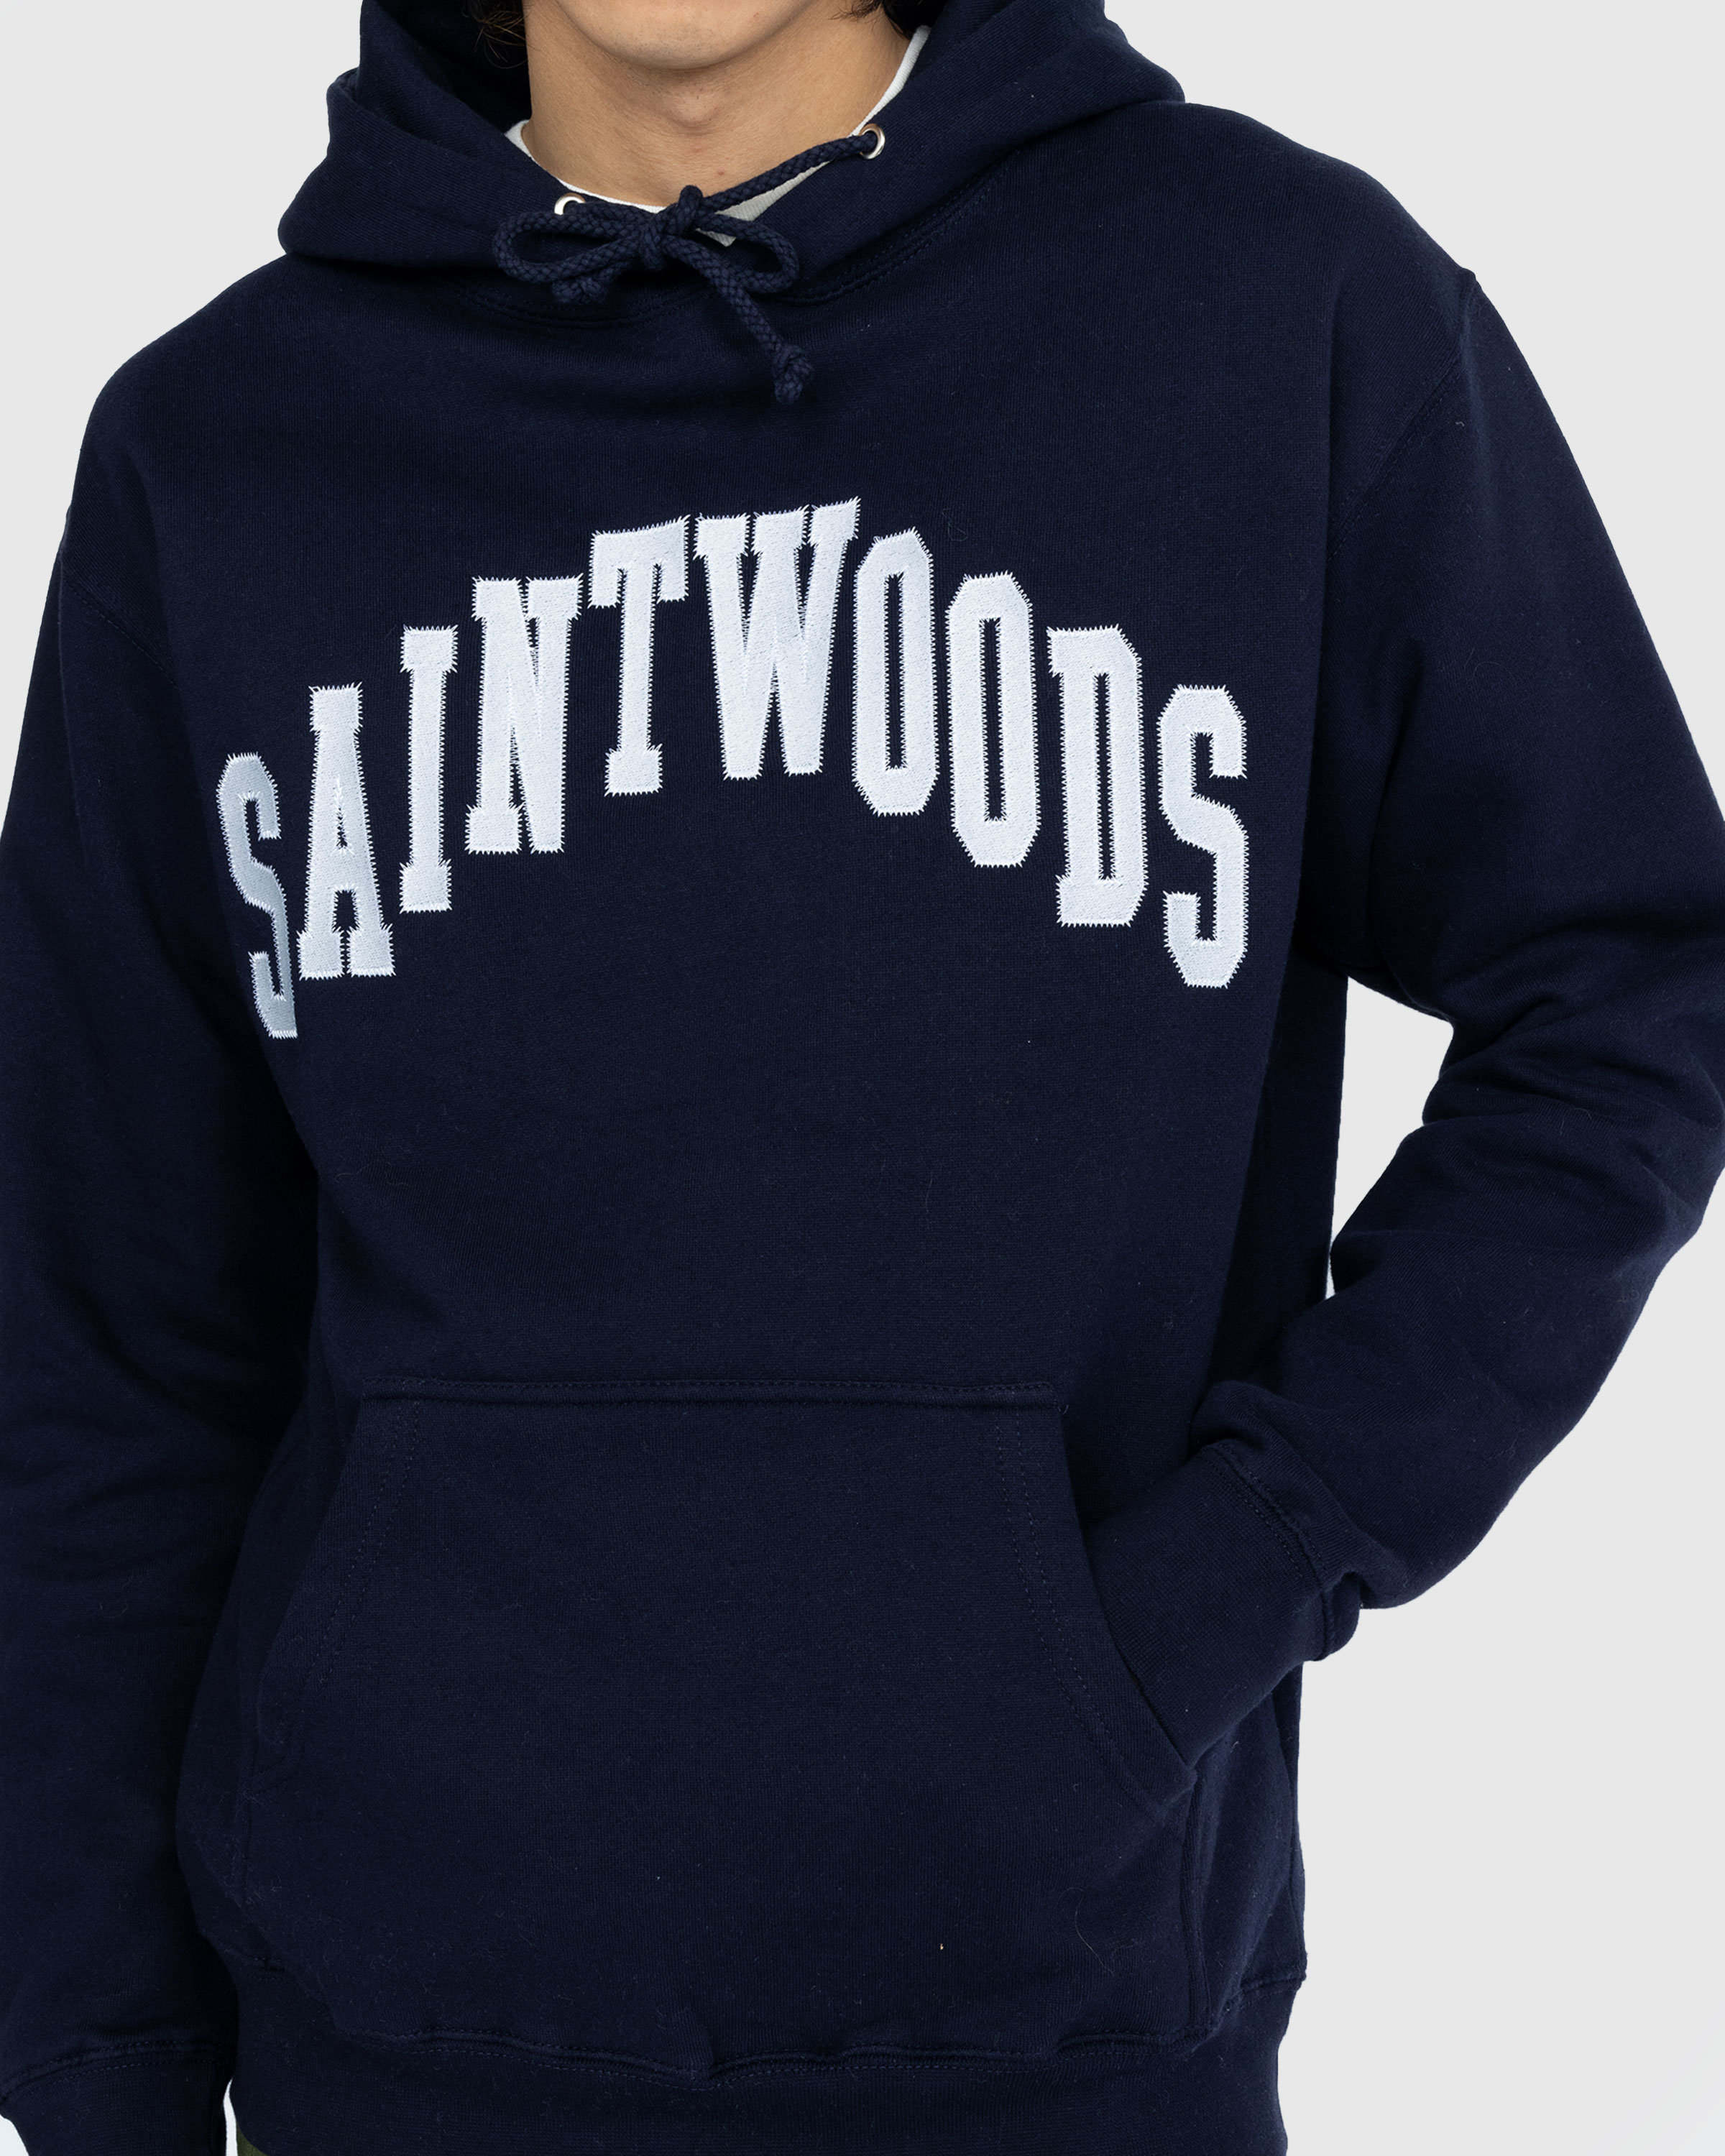 Saintwoods - Arch Hoodie Navy - Clothing - Blue - Image 5